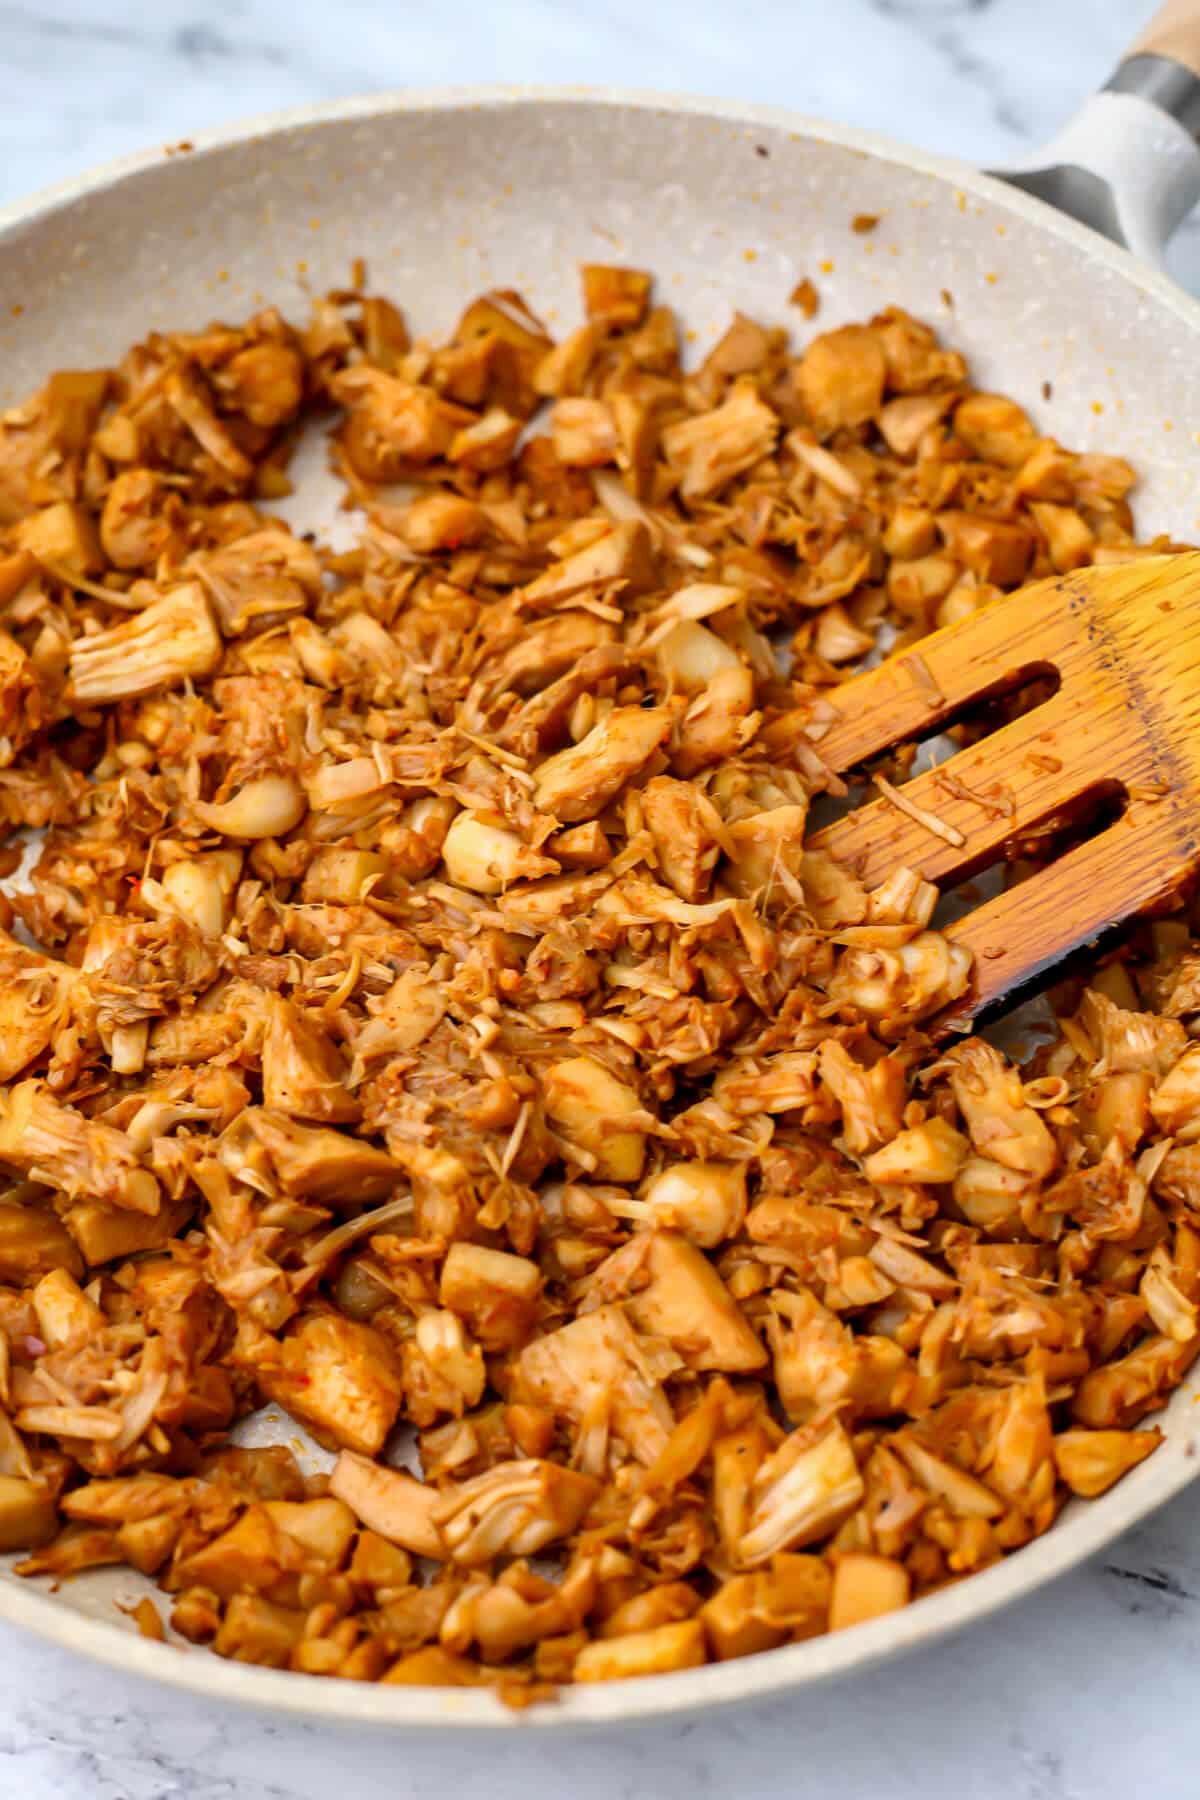 Seasoned jackfruit sautéing in a frying pan being stirred with a wooden spatula.